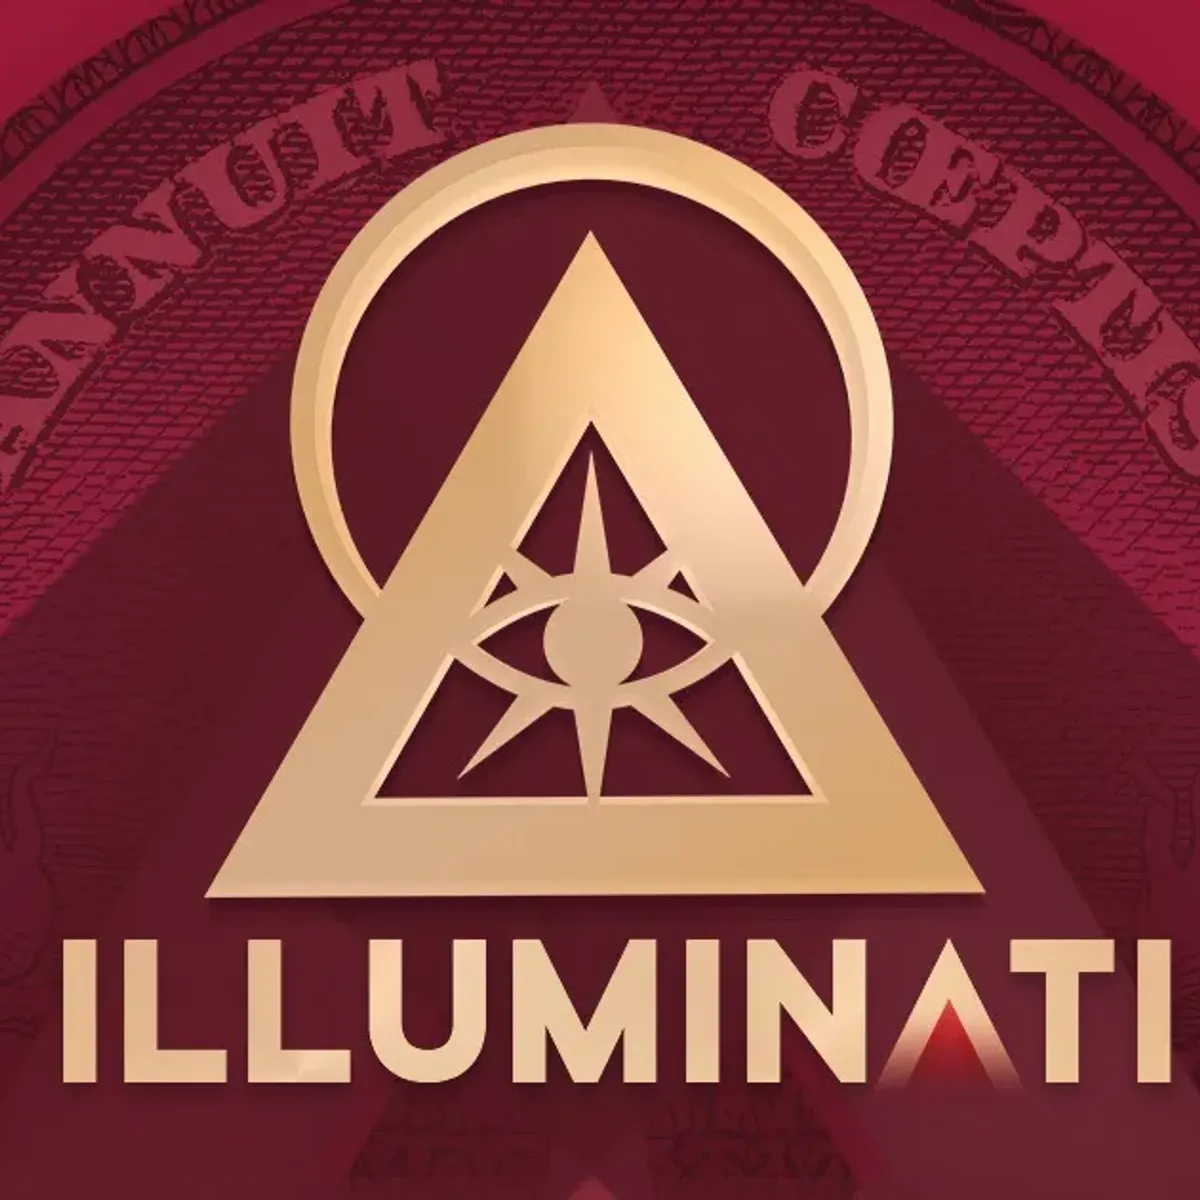 Conspiracy Theories about the Illuminati the secret society that hijacked the world domination